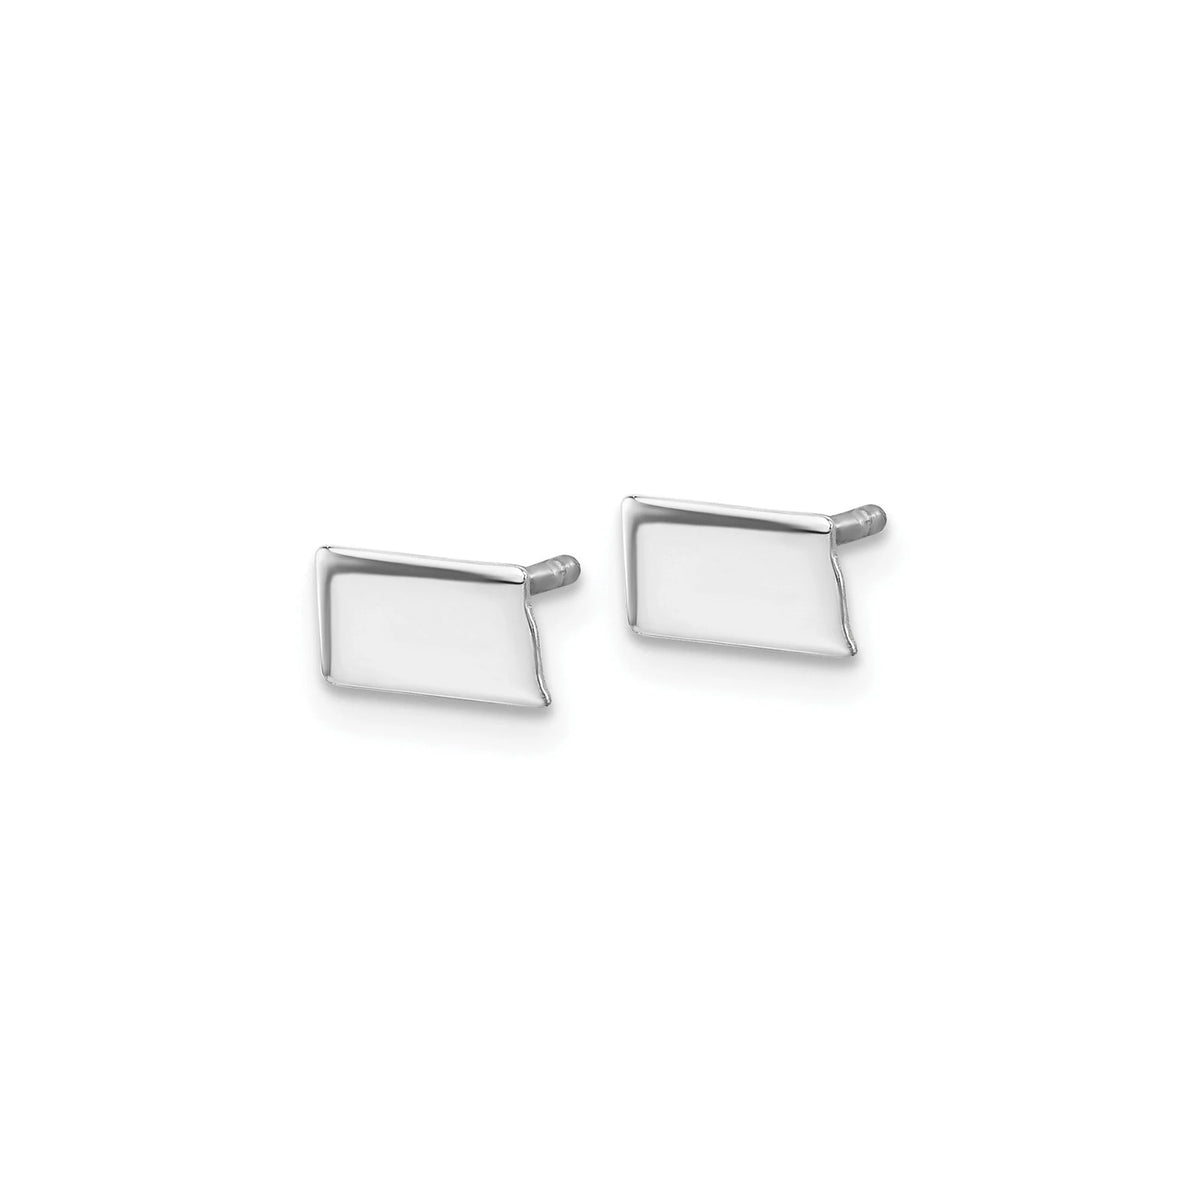 South Dakota Tiny State Stud Earrings - All States Available in Sterling Silver or 14k Yellow or White Gold - Tiny & Beautiful SD Studs